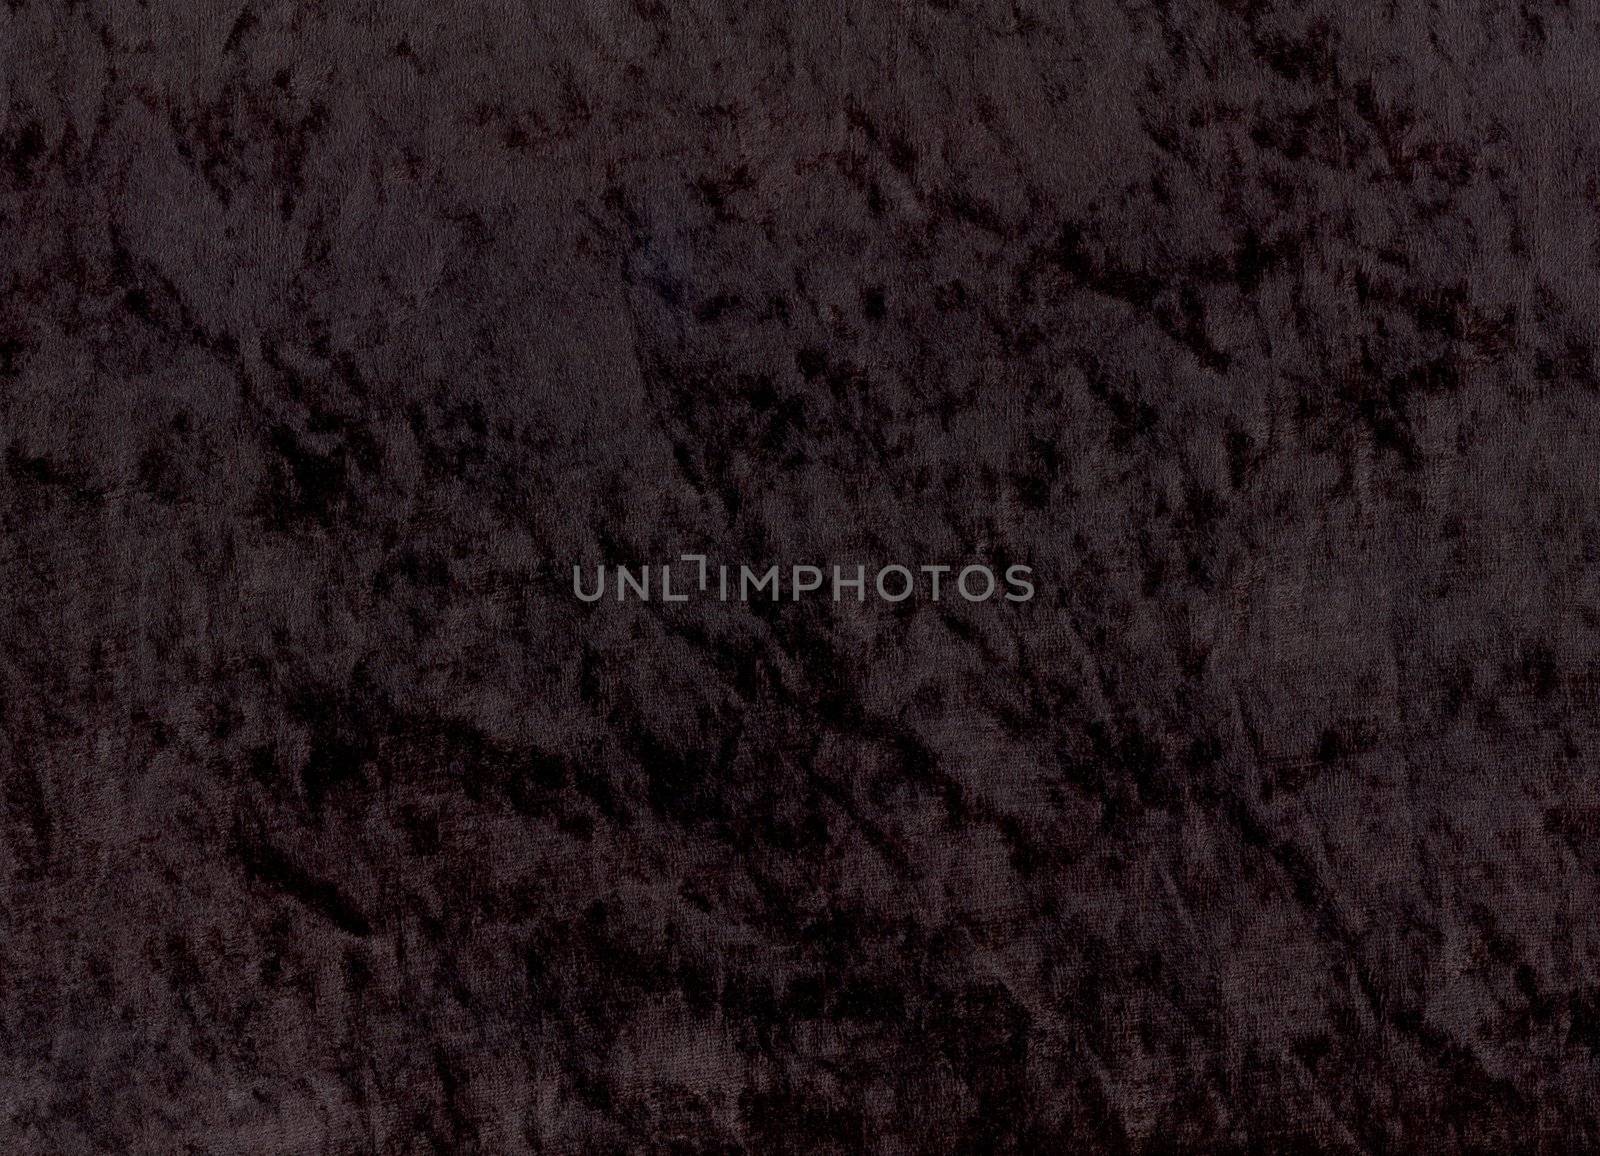 A sample of black shimmery velours fabric - an exclusive and trendy background.